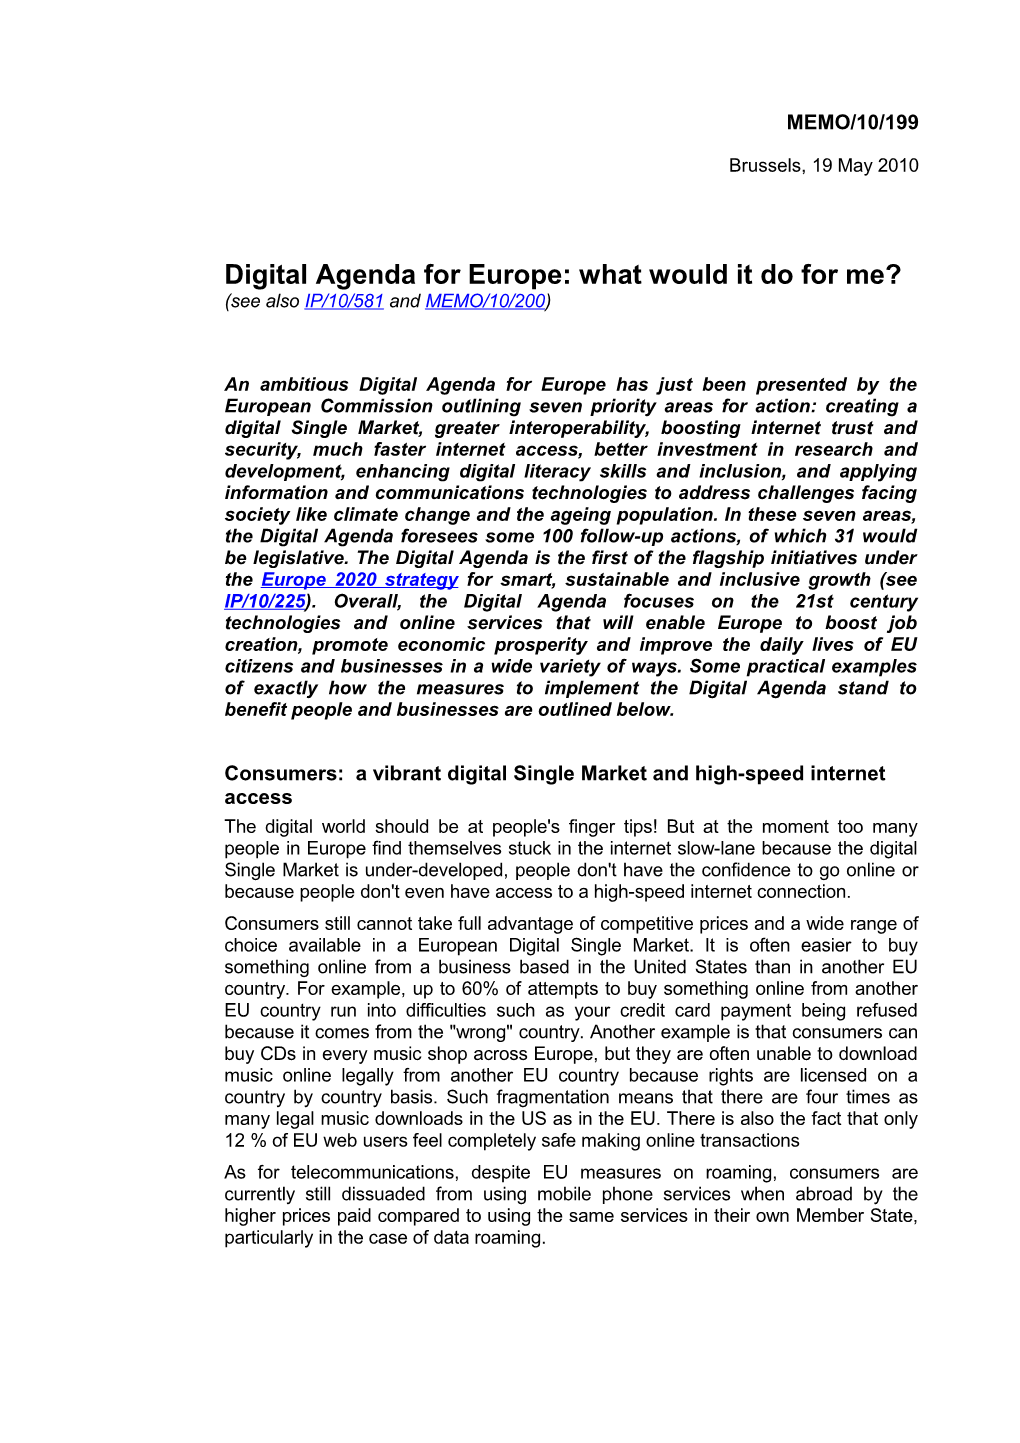 Digital Agenda for Europe: What Would It Do for Me?